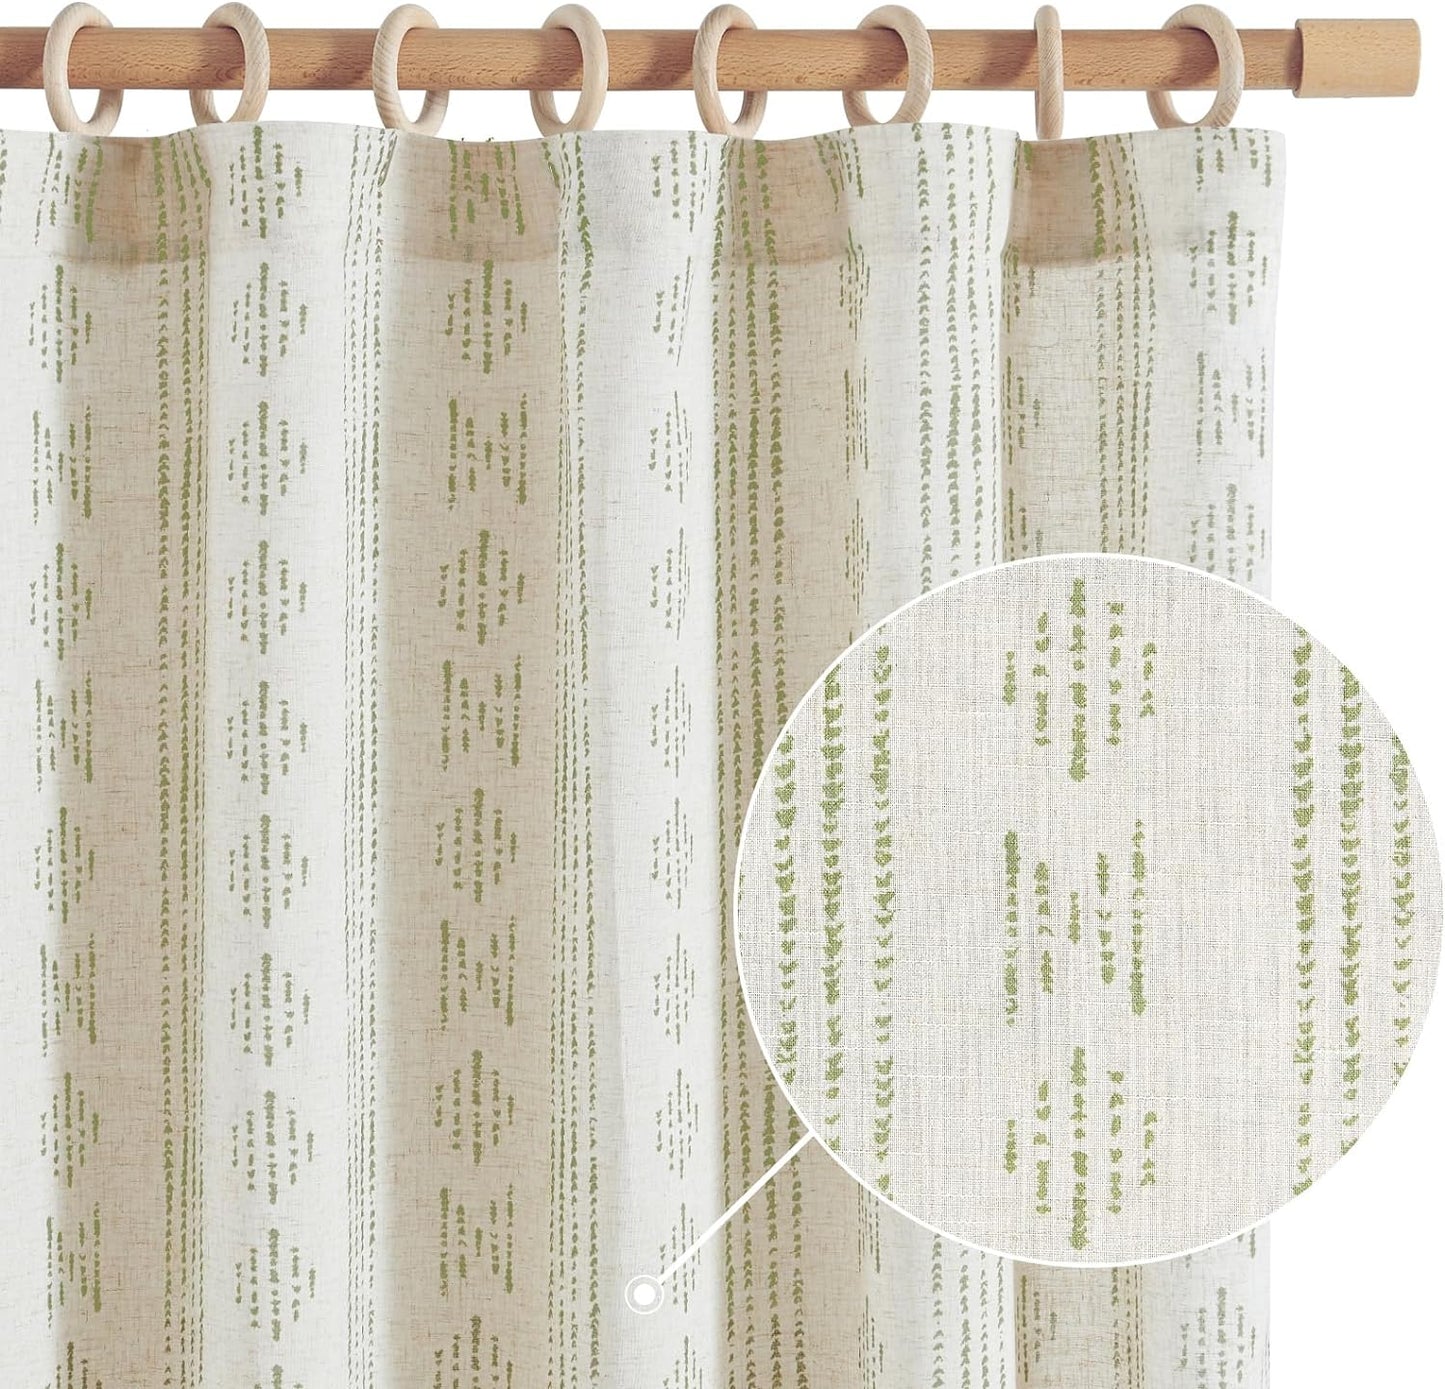 Jinchan Boho Curtains Linen Sliding Patio Door Curtains 84 Inches Long 1 Panel Divider Drapes Extra Wide Black Farmhouse Curtains for Living Room Geometric Striped Light Filtering Grommet Curtains  CKNY HOME FASHION Back Tab| Sage On Flax W52 X L63 